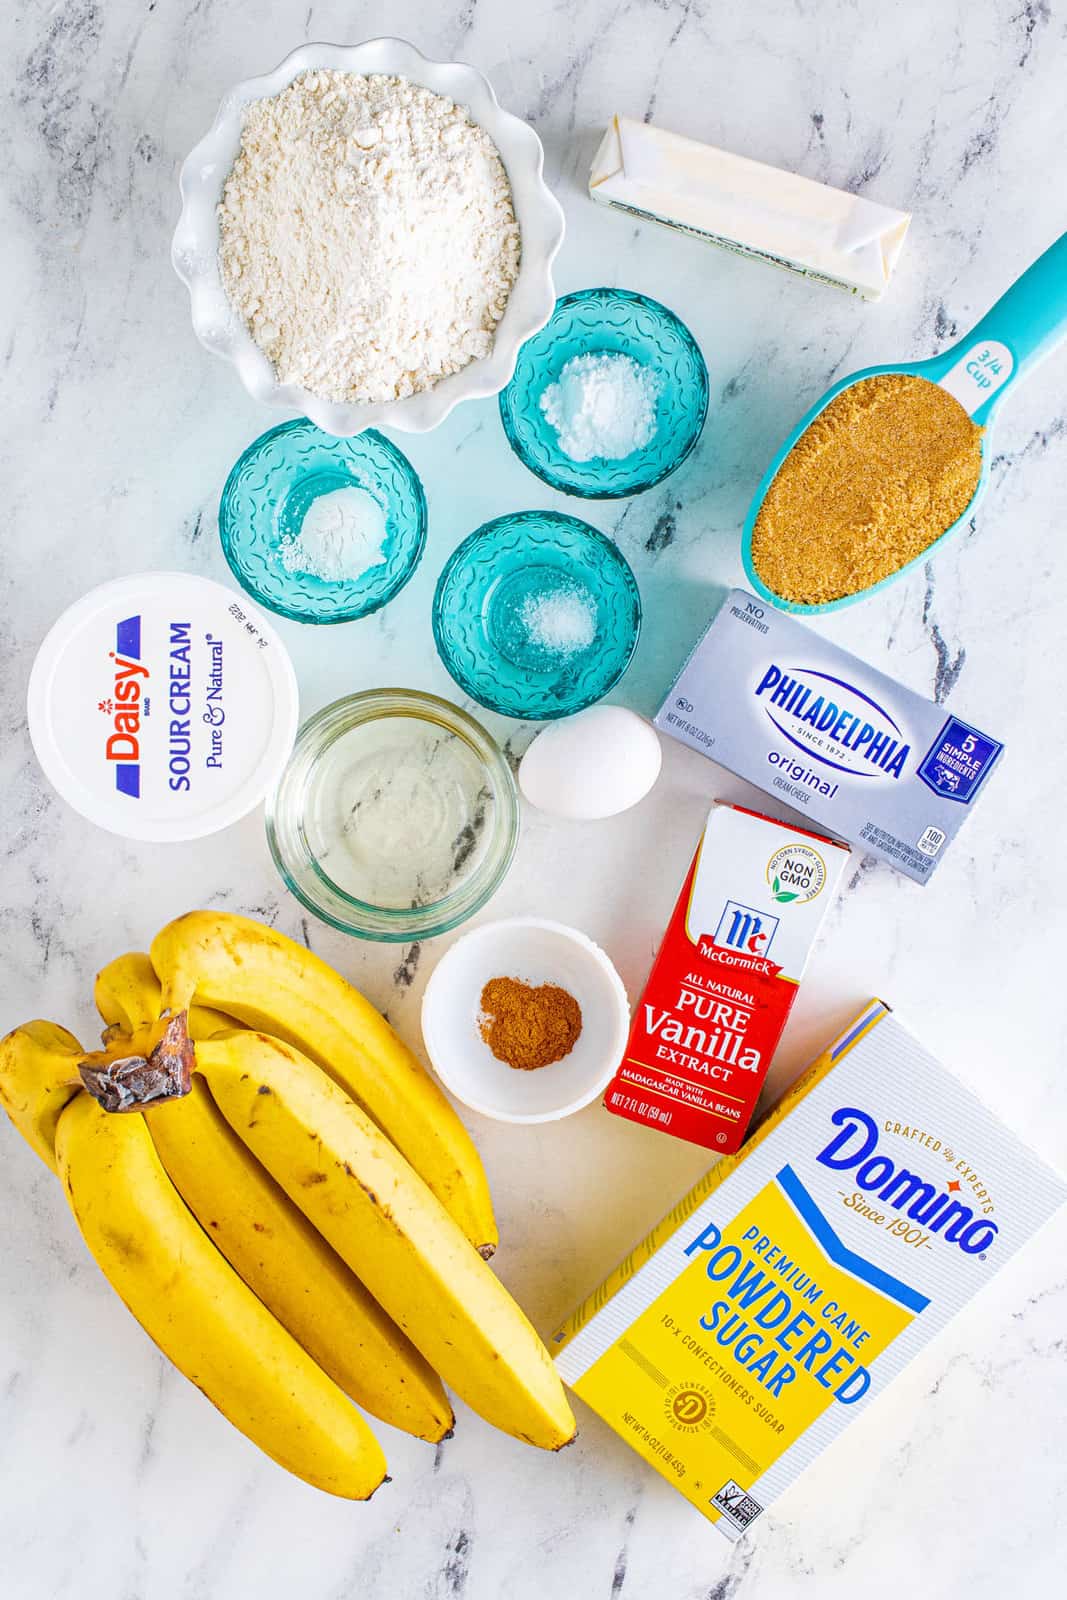 Ingredients needed to make Banana Cupcakes.